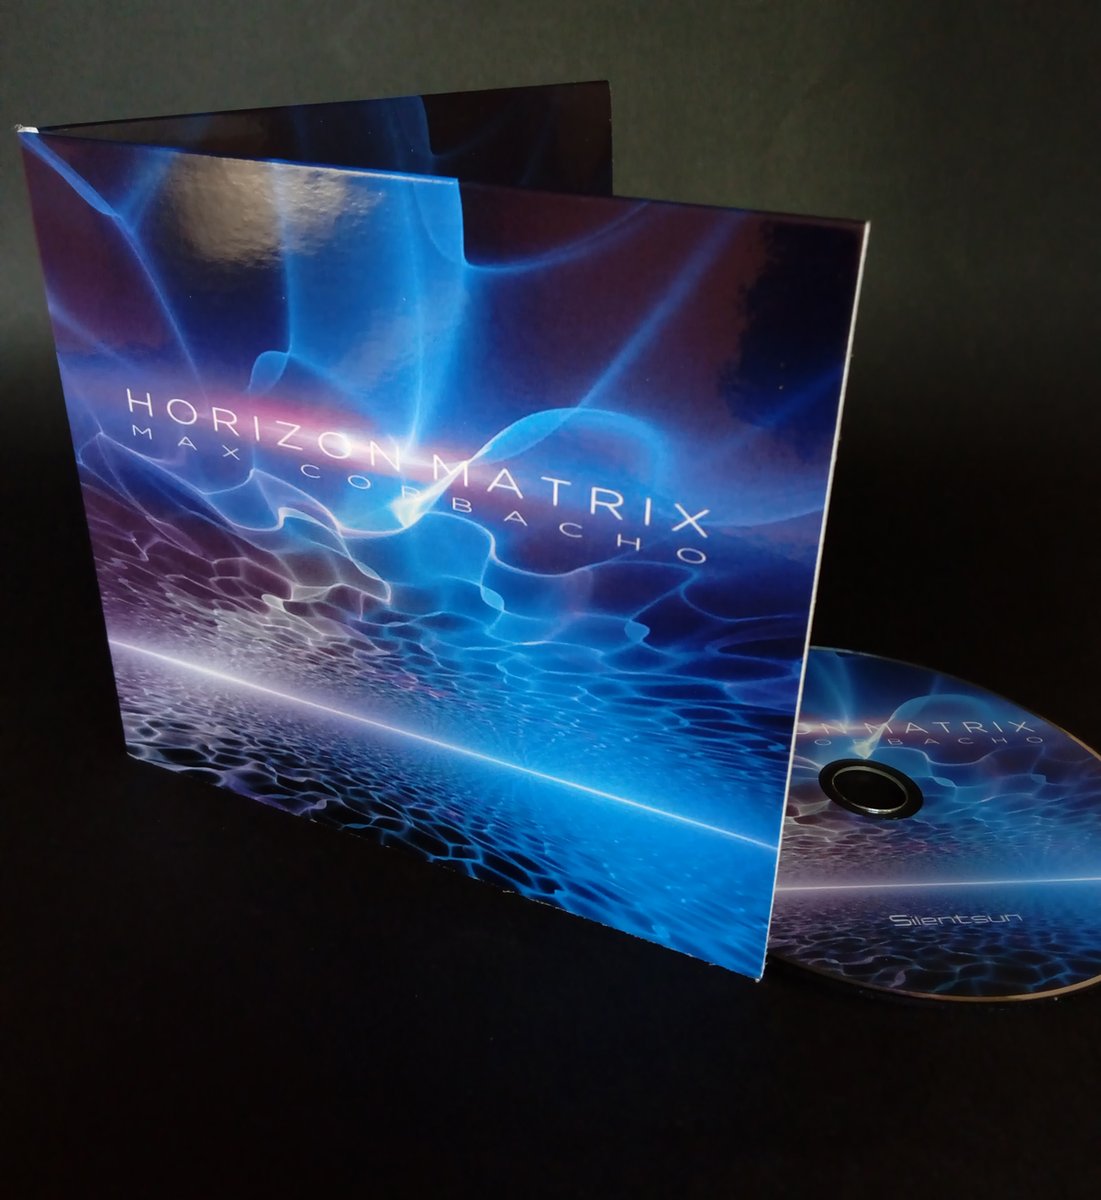 Horizon Matrix by Max Corbacho: 'Fluid patterns, ethereal soundscapes and profound liquid textures interacting and melting seamlessly while releasing its imaginative yet delicate sonic perfume through its leaves.' Review by Sonicimmersion.org. maxcorbacho.bandcamp.com/album/horizon-…